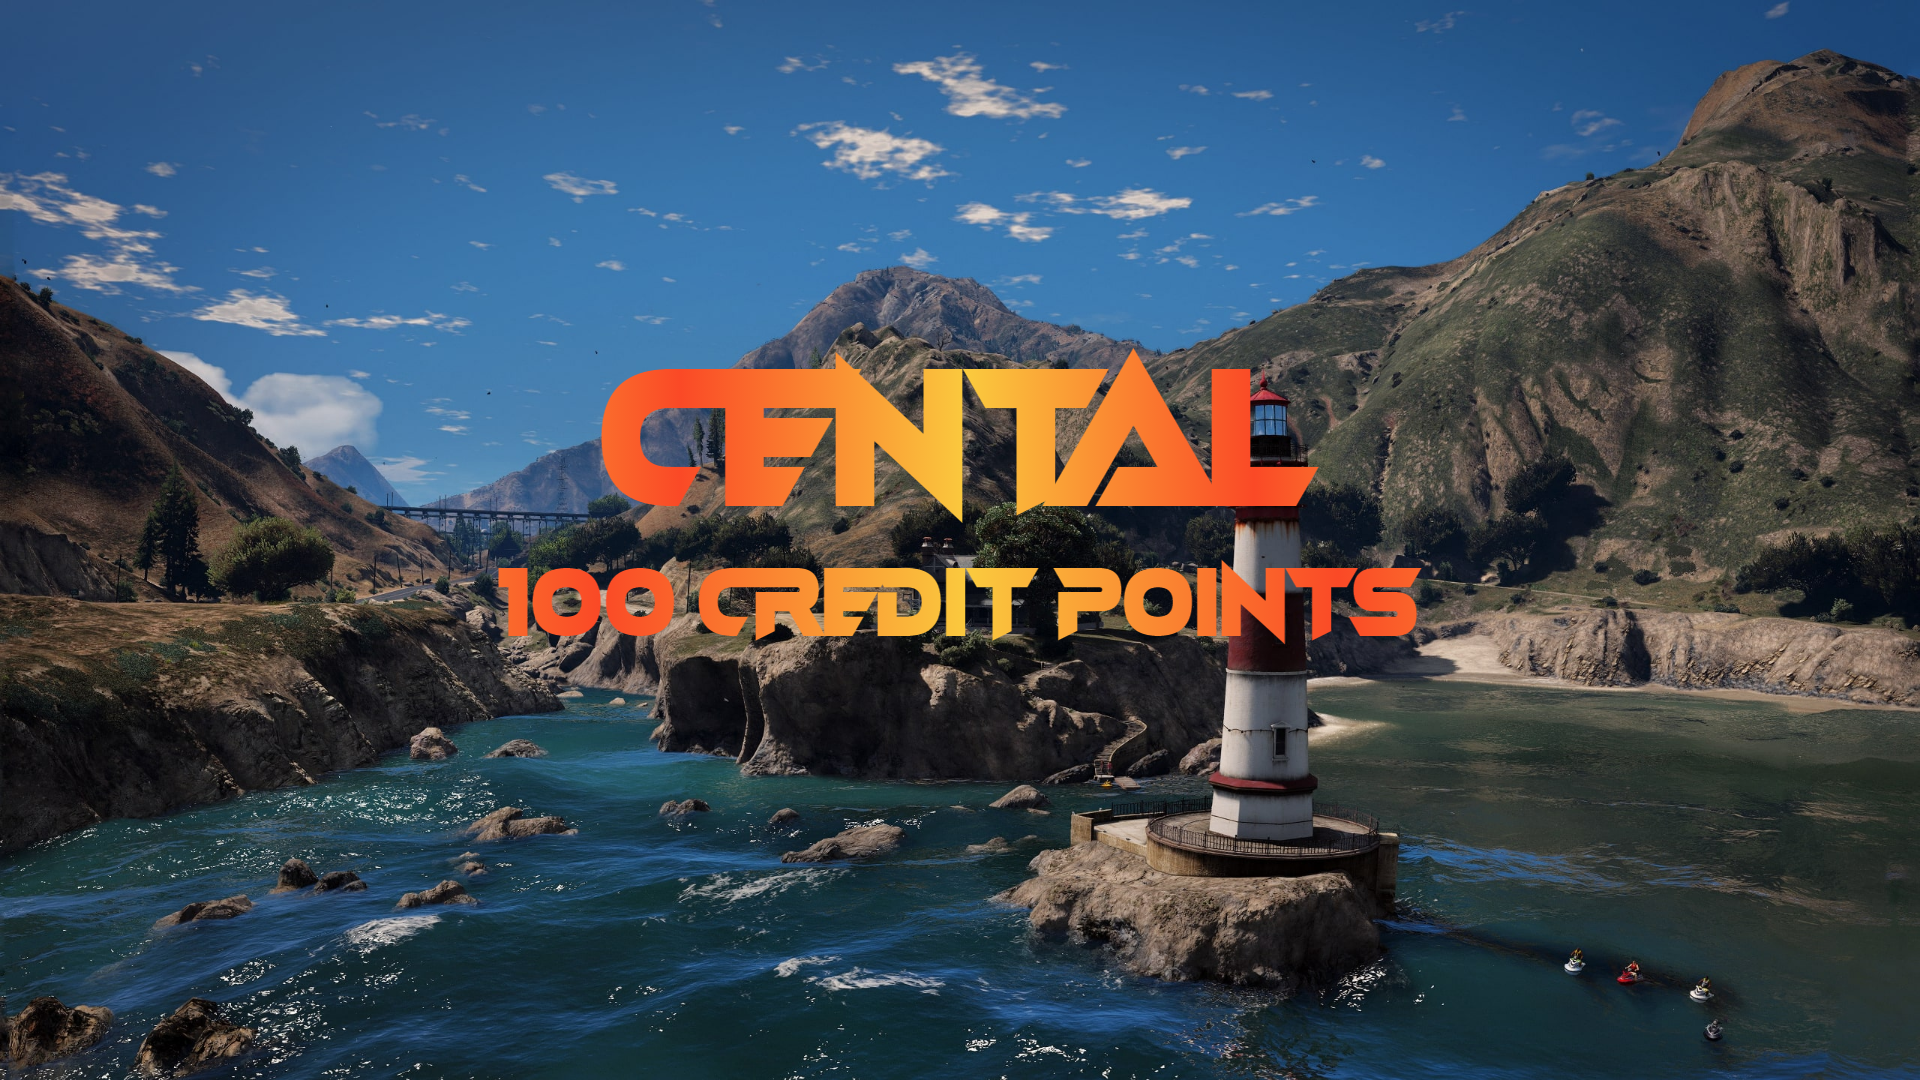 CentralRP - 100 Credit Points Gift Card $11.29